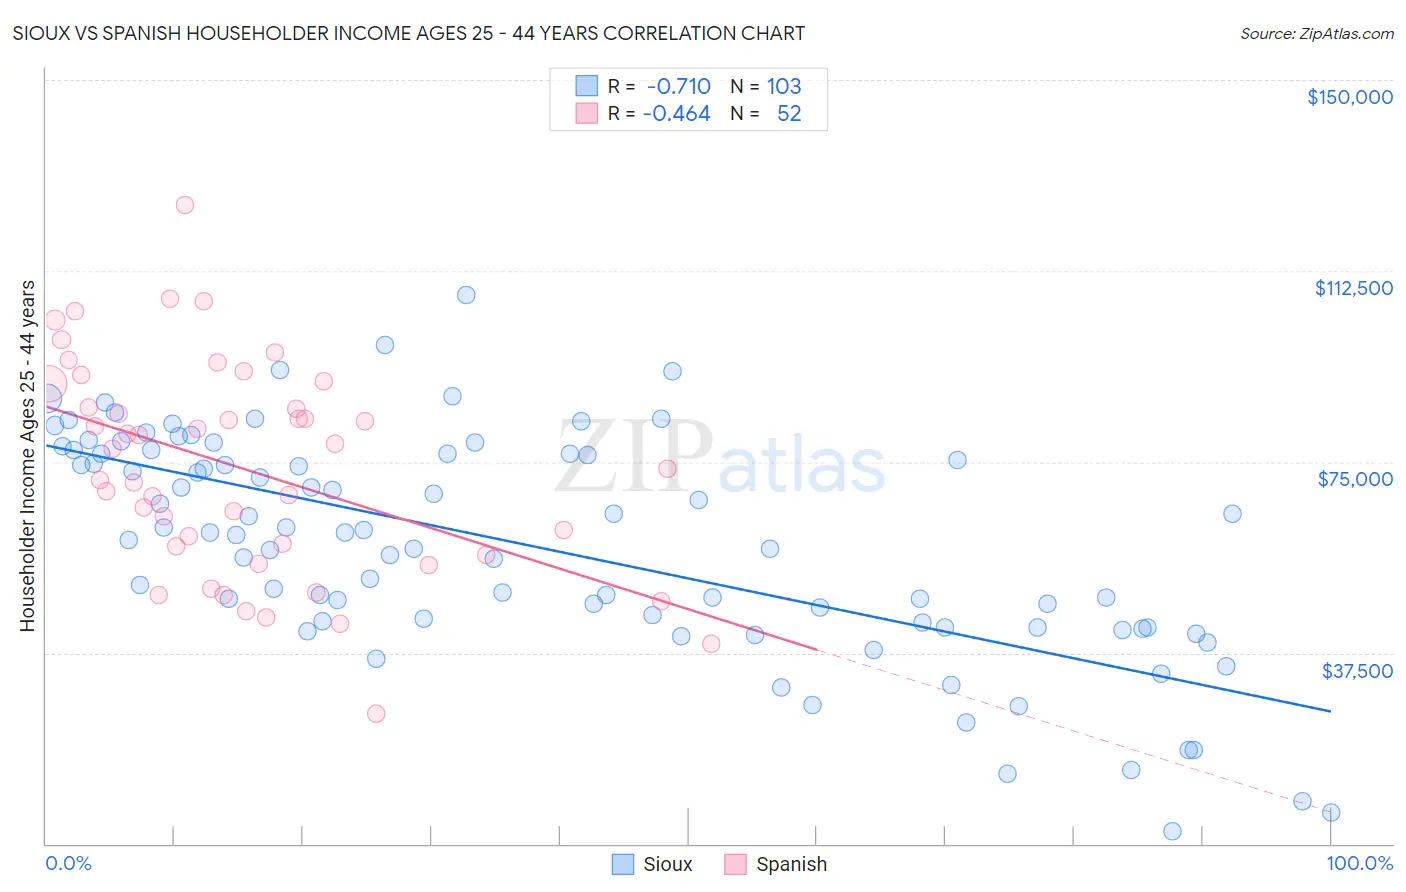 Sioux vs Spanish Householder Income Ages 25 - 44 years